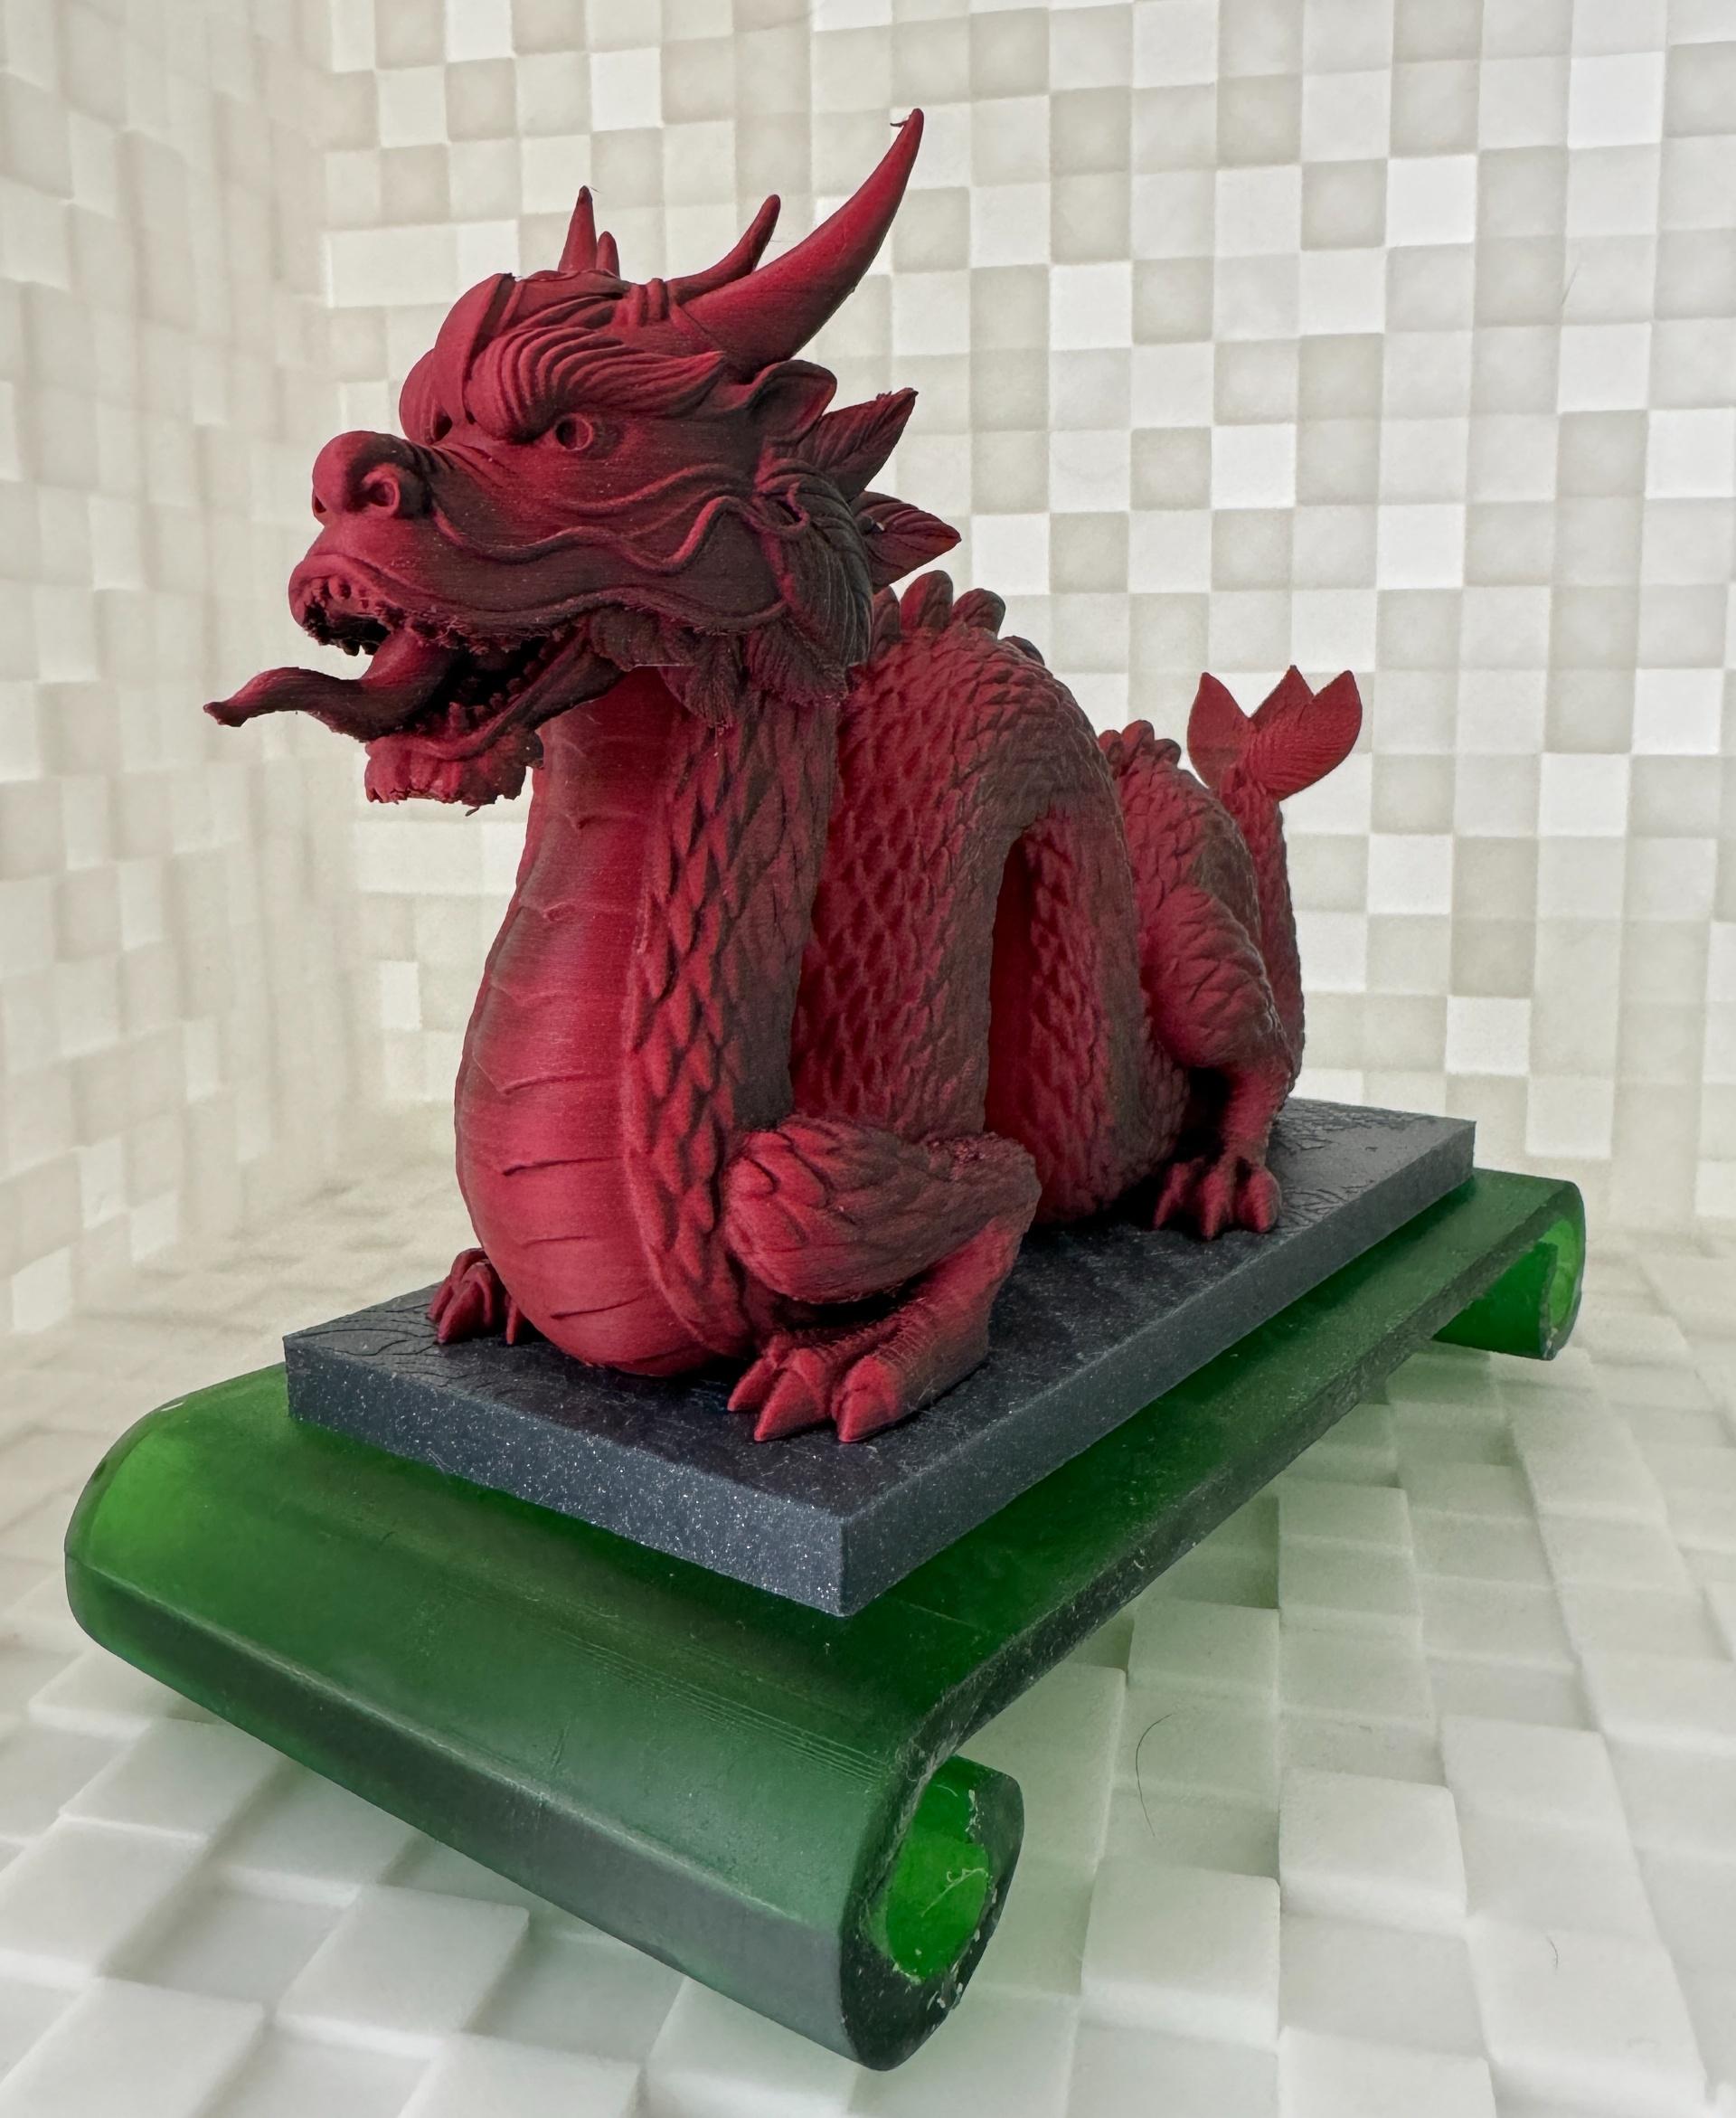 Chinese Dragon  - Printed in Polymaker Polyterra Shadow Red PLA, Overture Sparkle Dark Grey PLA on the Bambu X1C at 0.2mm layer height, and the base is printed in Anycubic Translucent Green Resin on the Elegoo Saturn 2 to give it that look of Jade. - 3d model